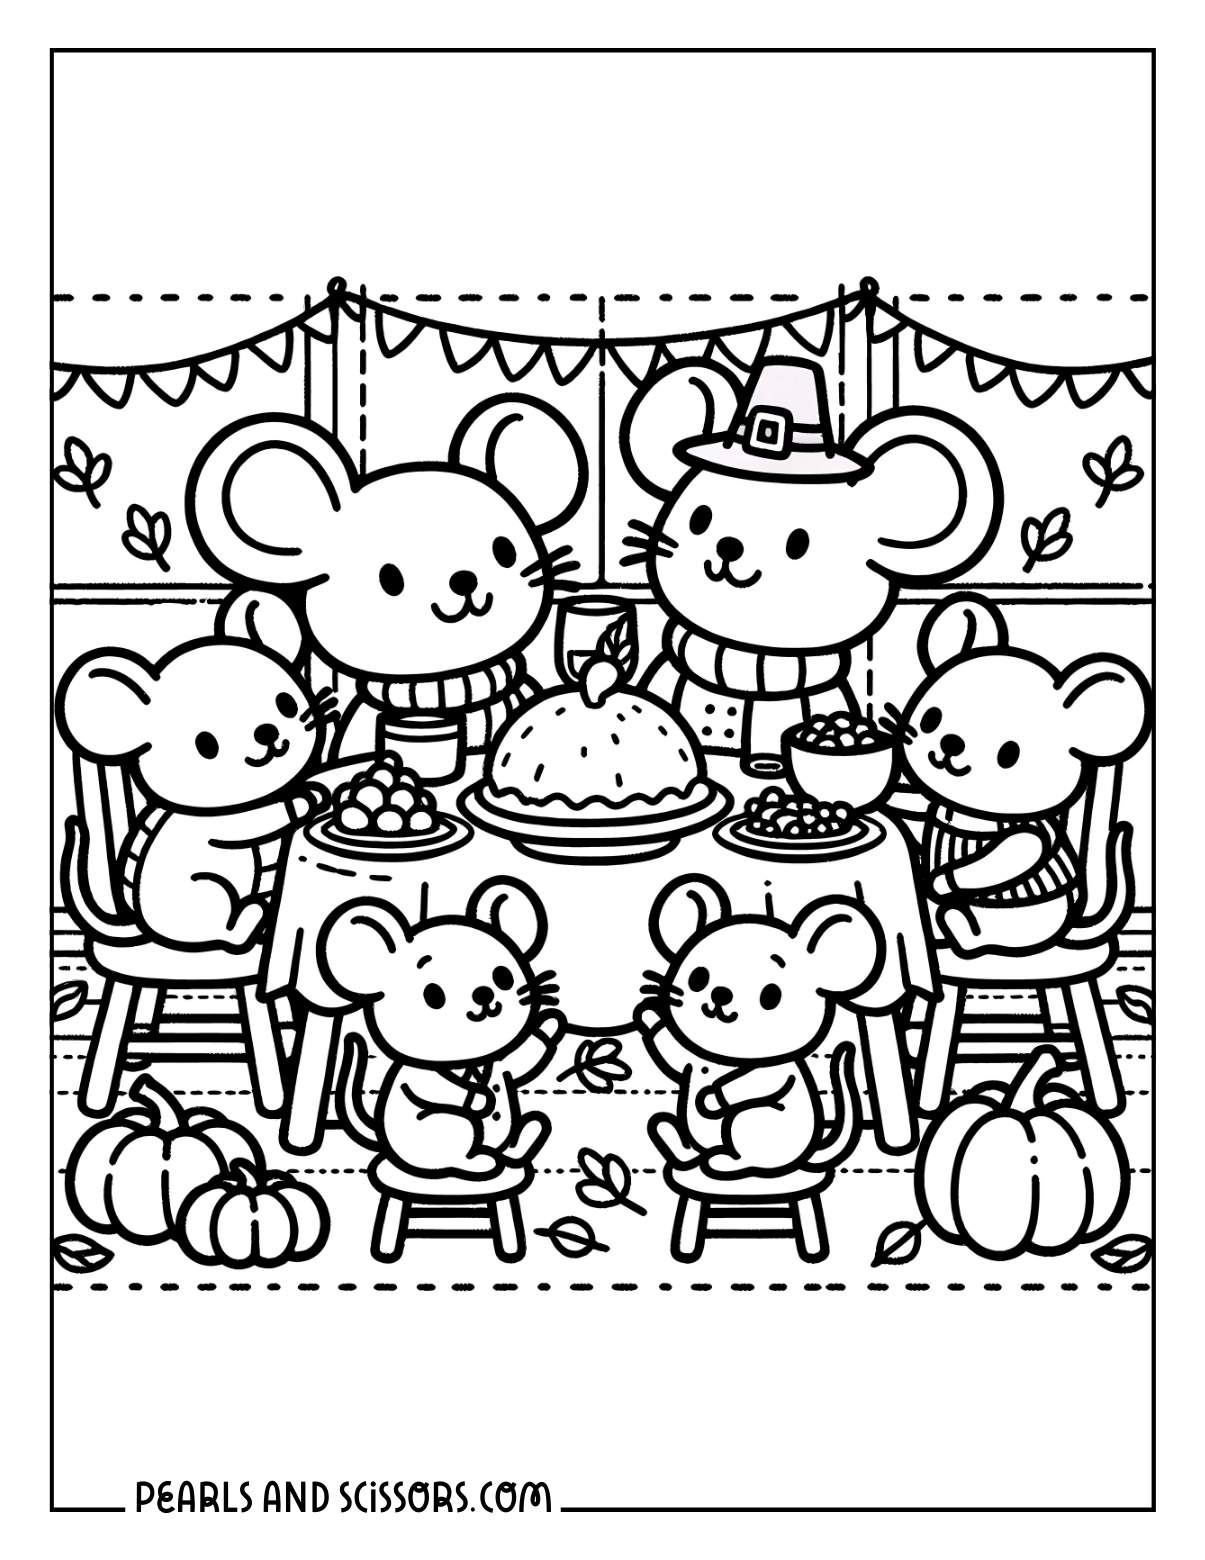 Family of mice having thanksgiving dinner coloring page.